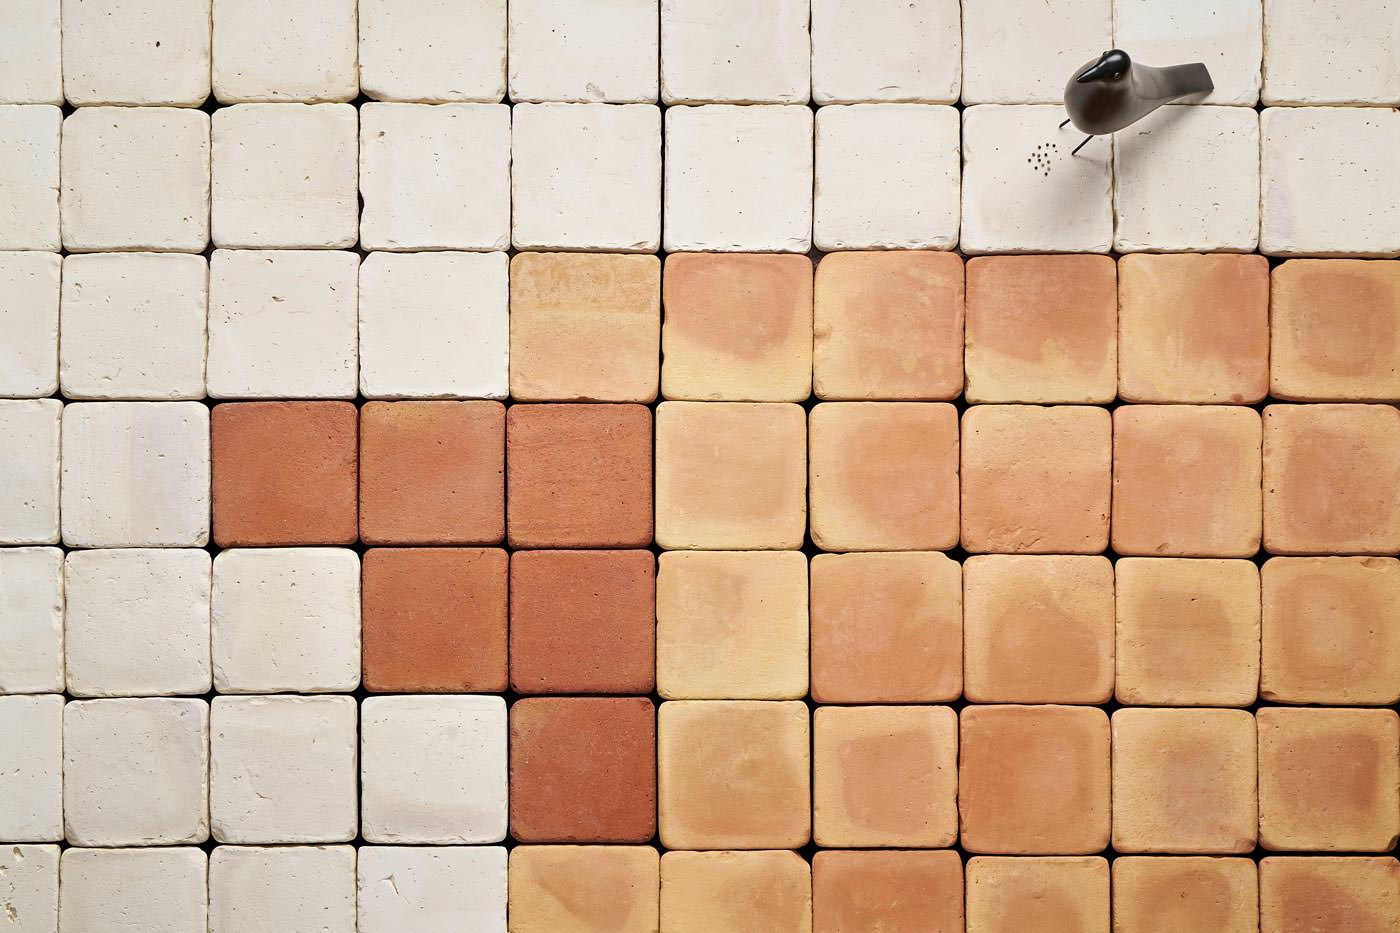 A terracotta floor made of flamed straw tiles and white tiles